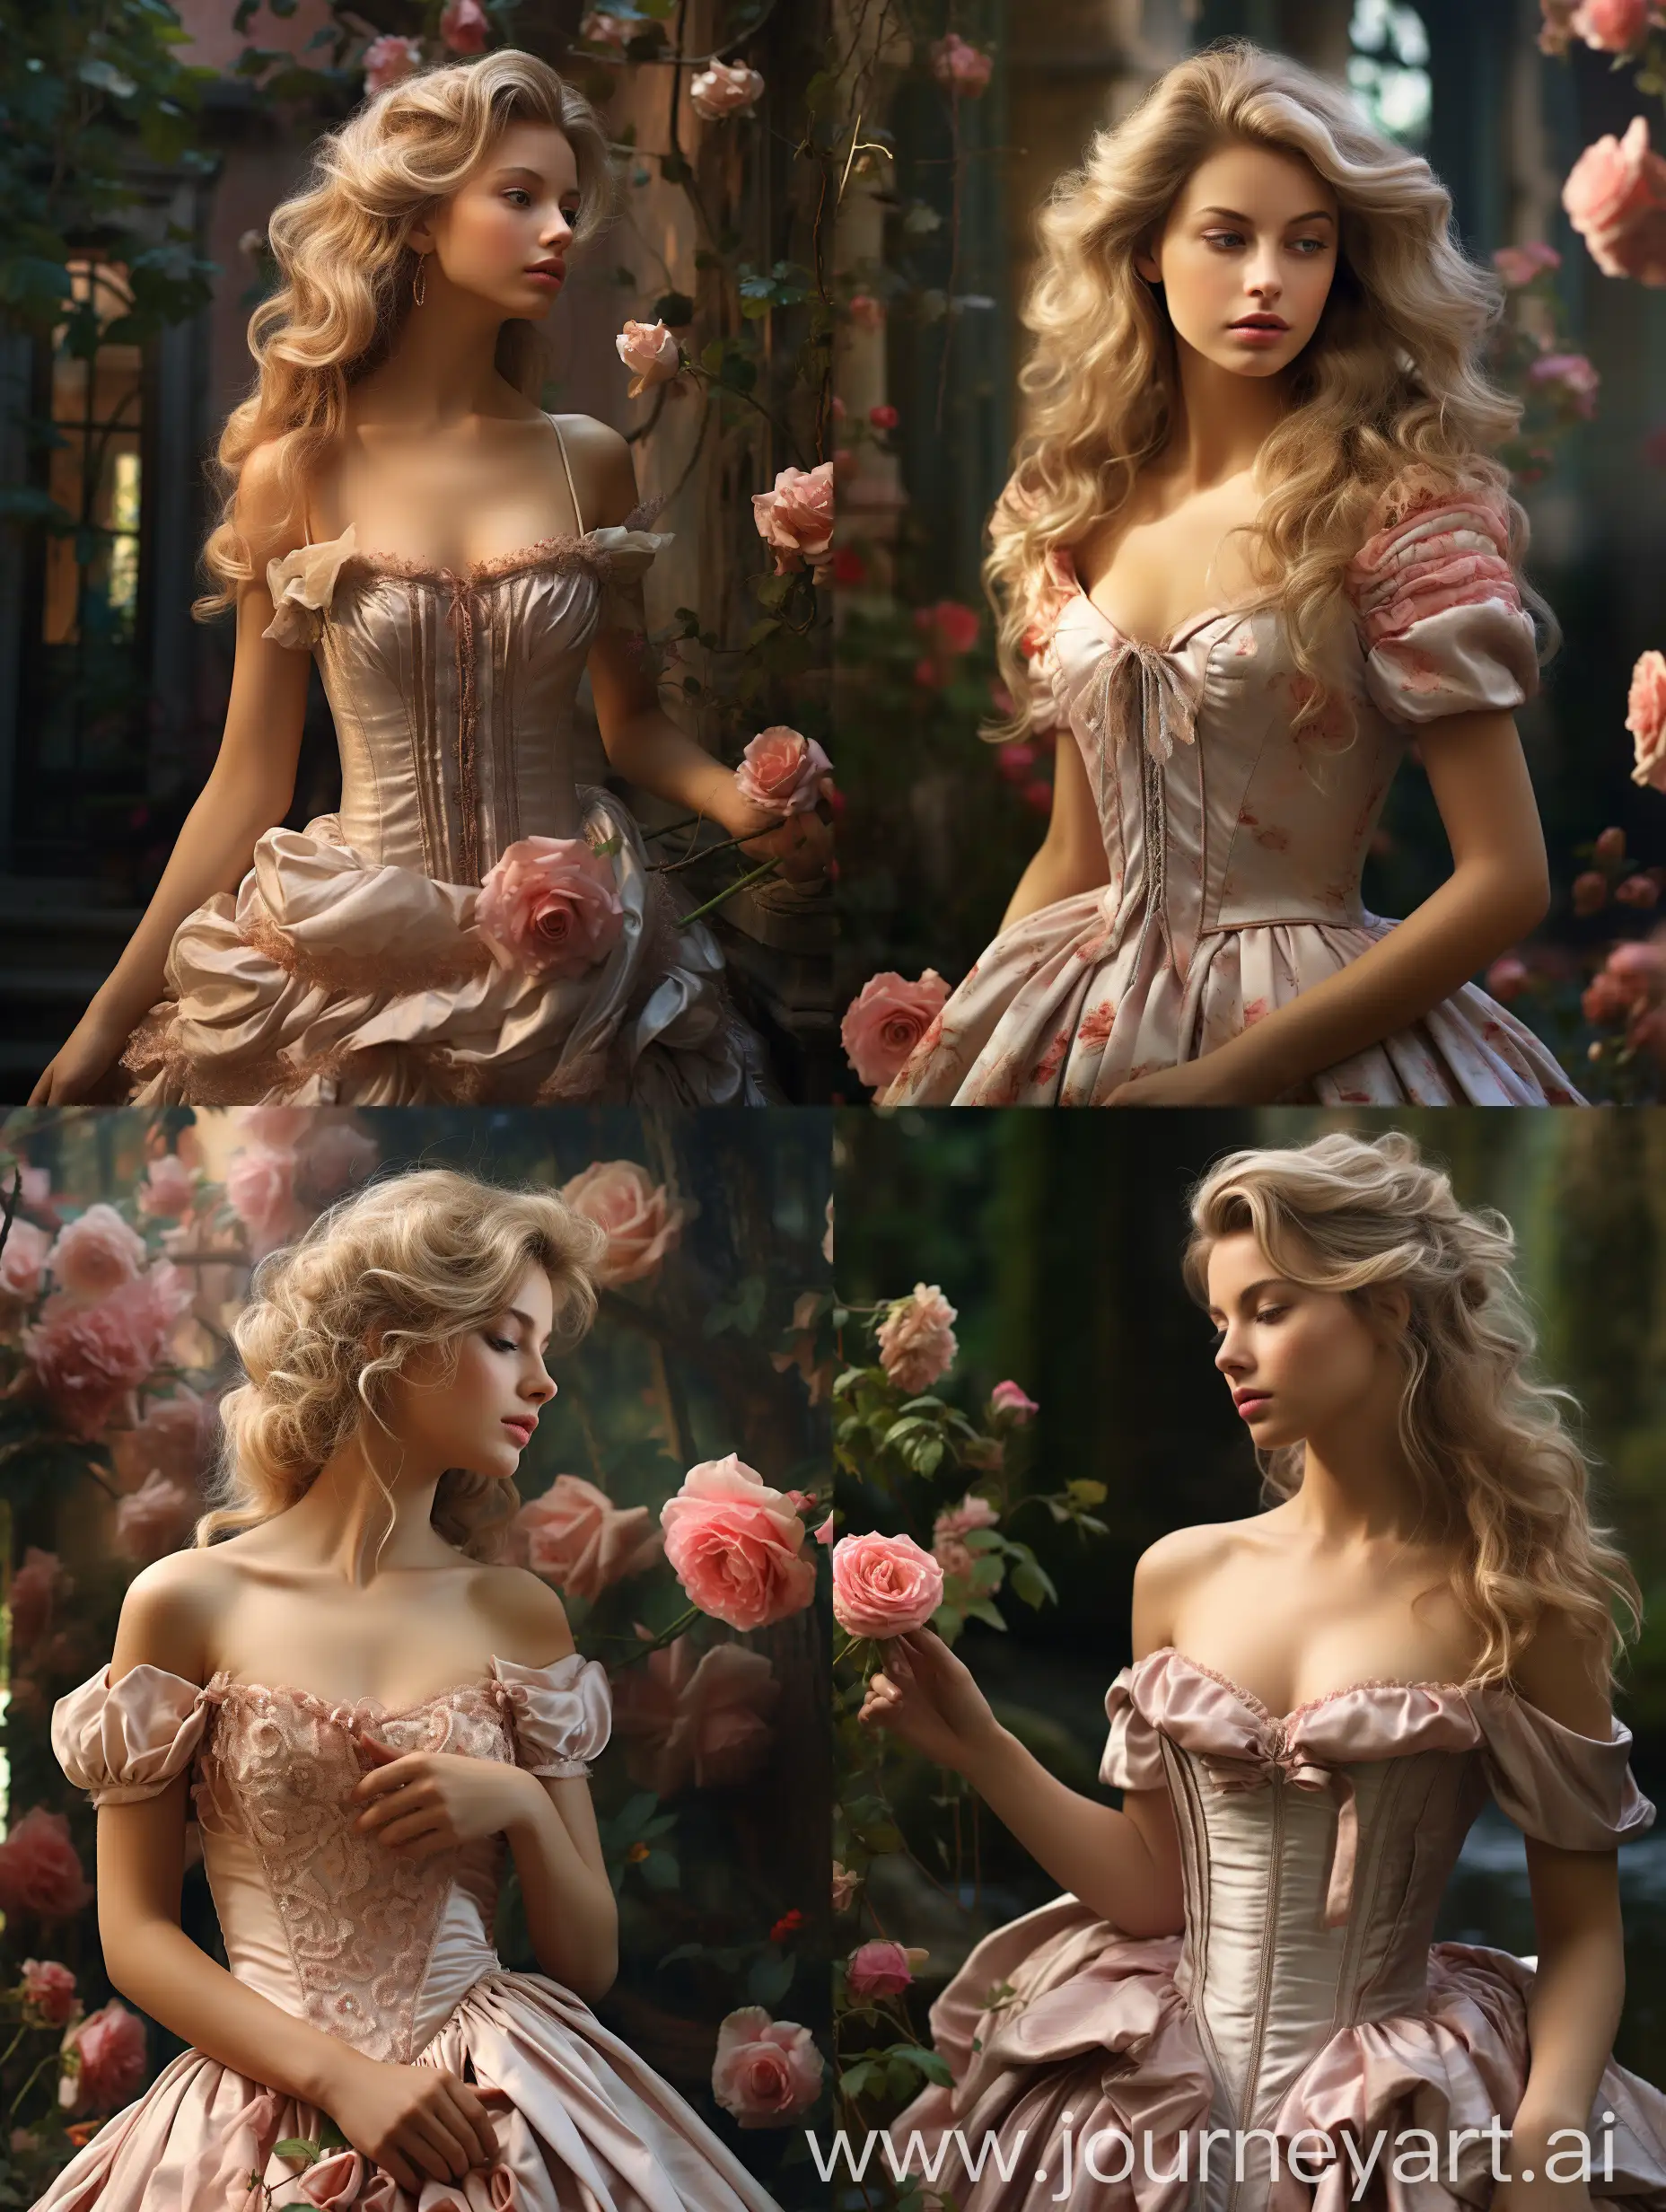  18th-century young woman strolling through garden, realistic photorealistic style, historical charm fairy-tale elegance, debutante with baroque opulence, rose-colored ballgown, luxury glamour, blonde hair, serene expression, distant garden backdrop, photographic medieval fashion aesthetics --v 5.2 --s 250